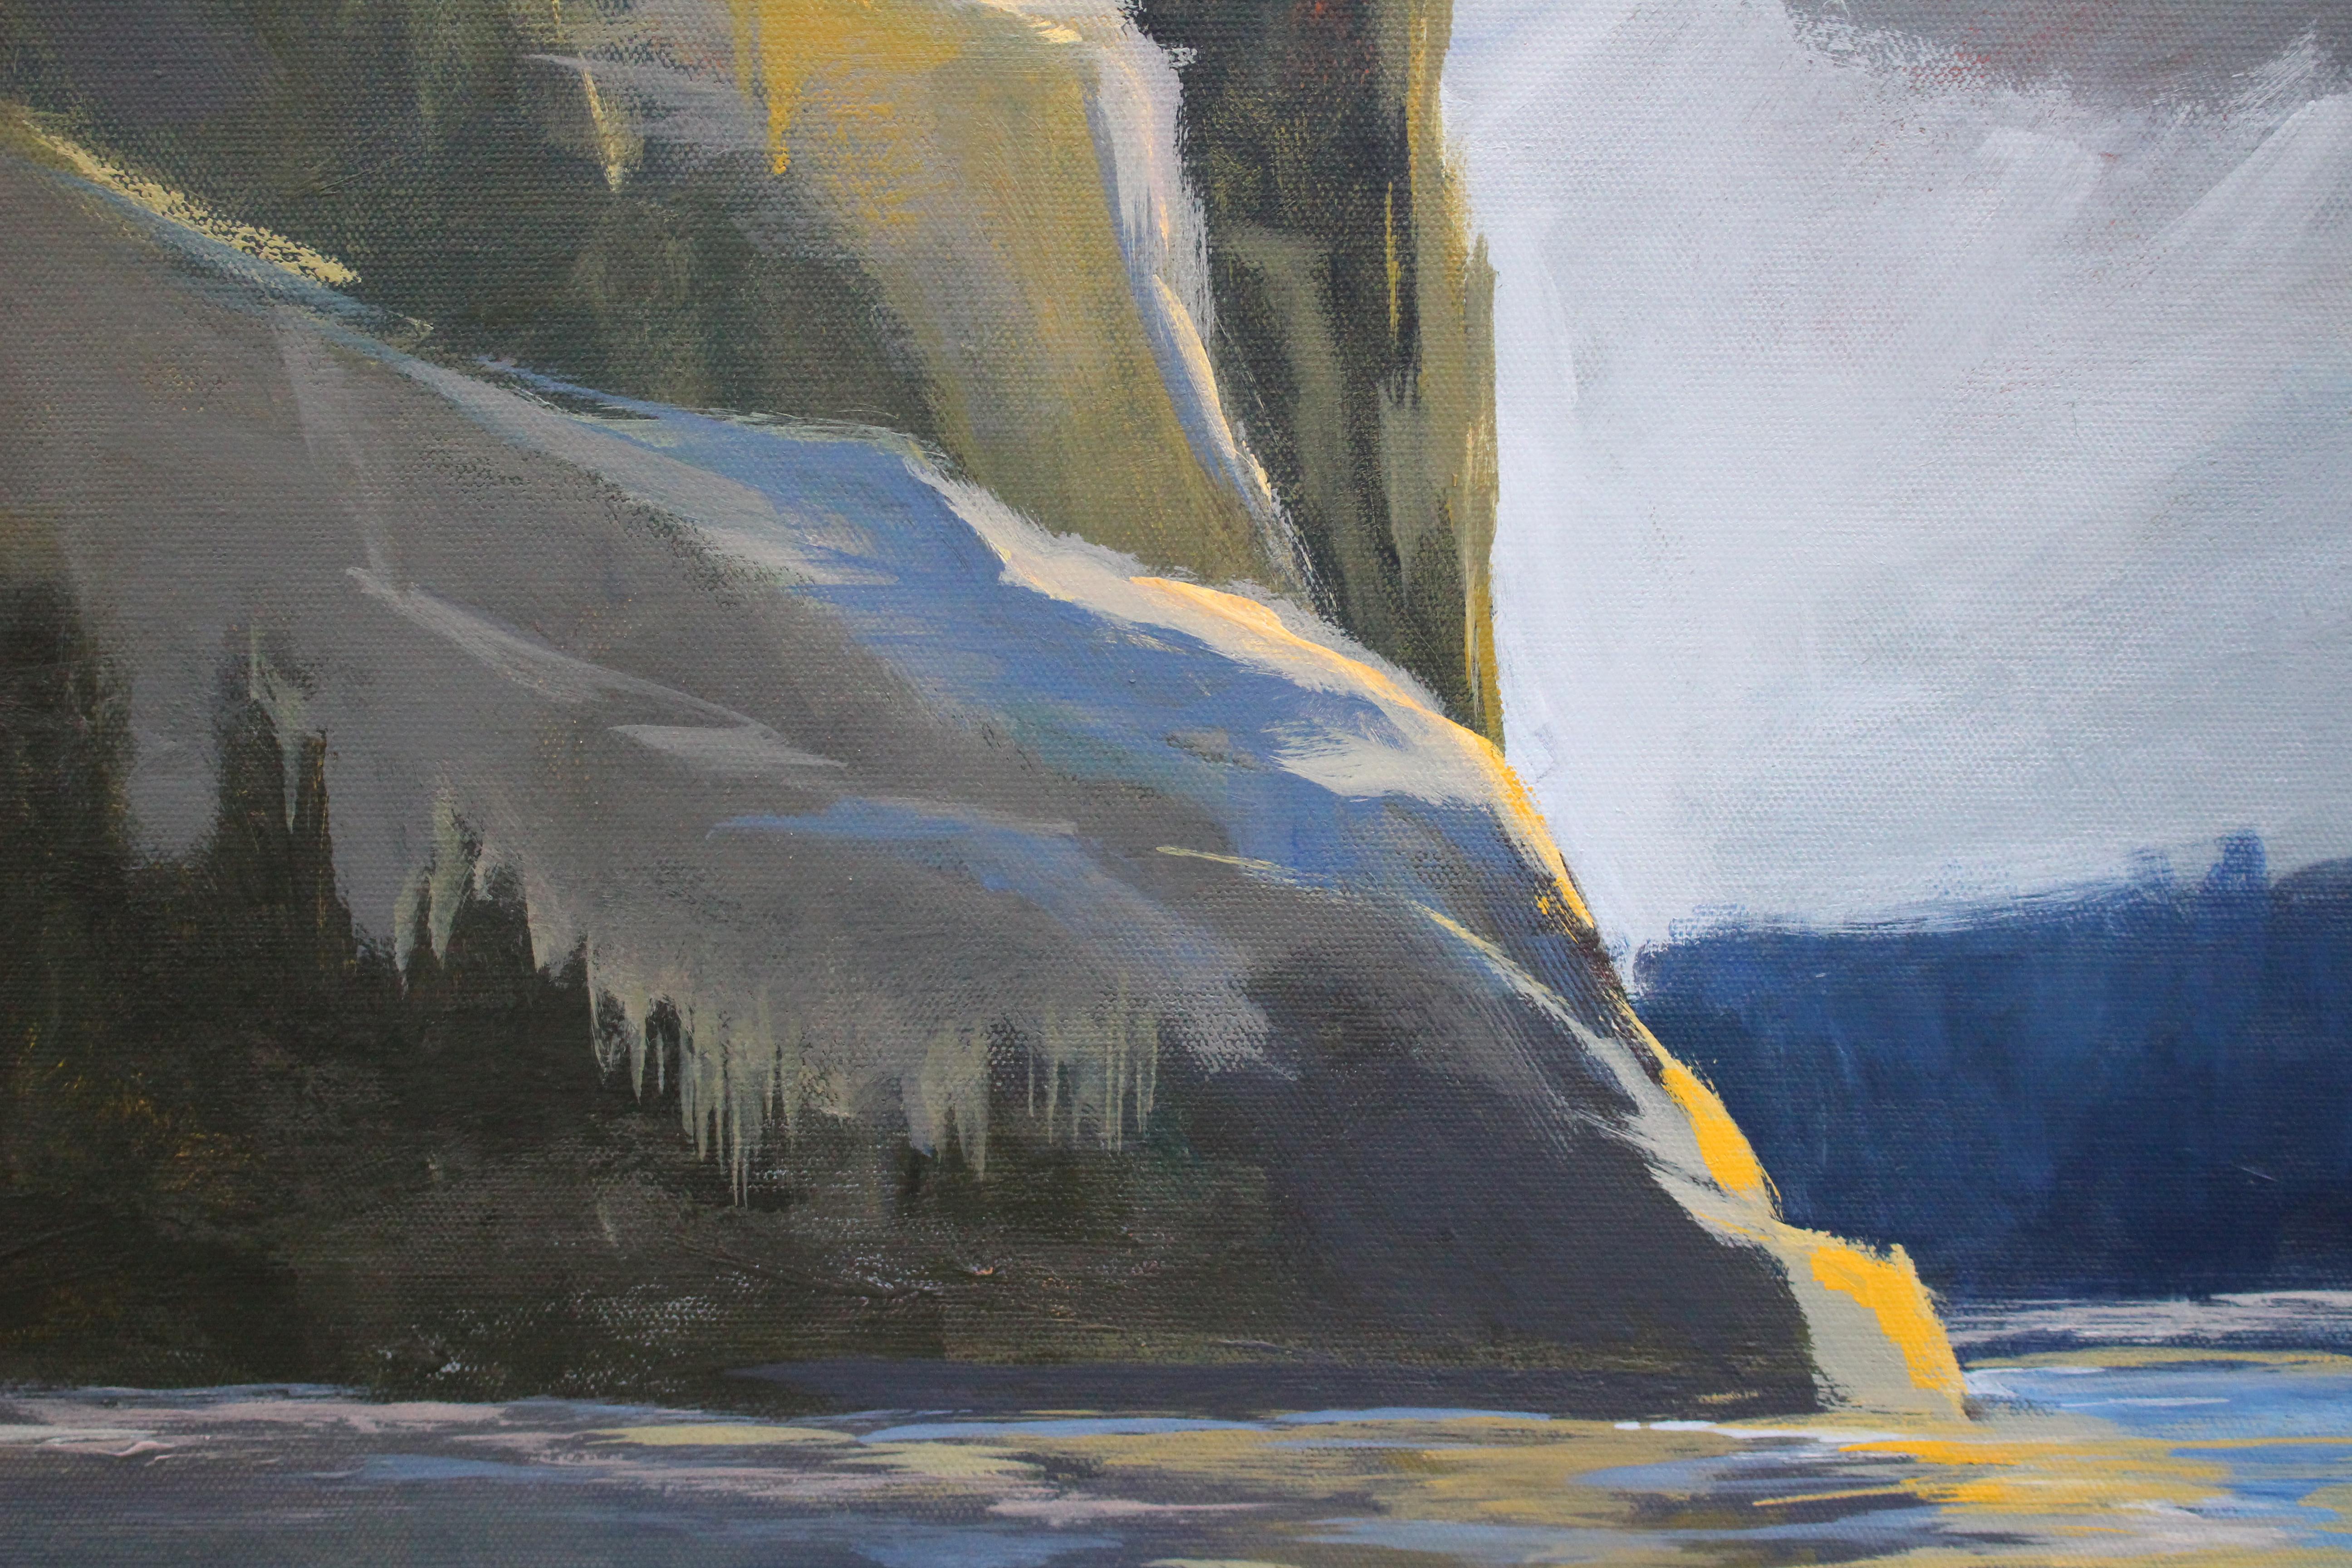 <p>Artist Comments<br /> This landscape painting was inspired by the coastline of the Strait of Juan de Fuca as it runs along the northern border of Washington State. The brooding skies of the Pacific Northwest and the craggy cliffs along the beach